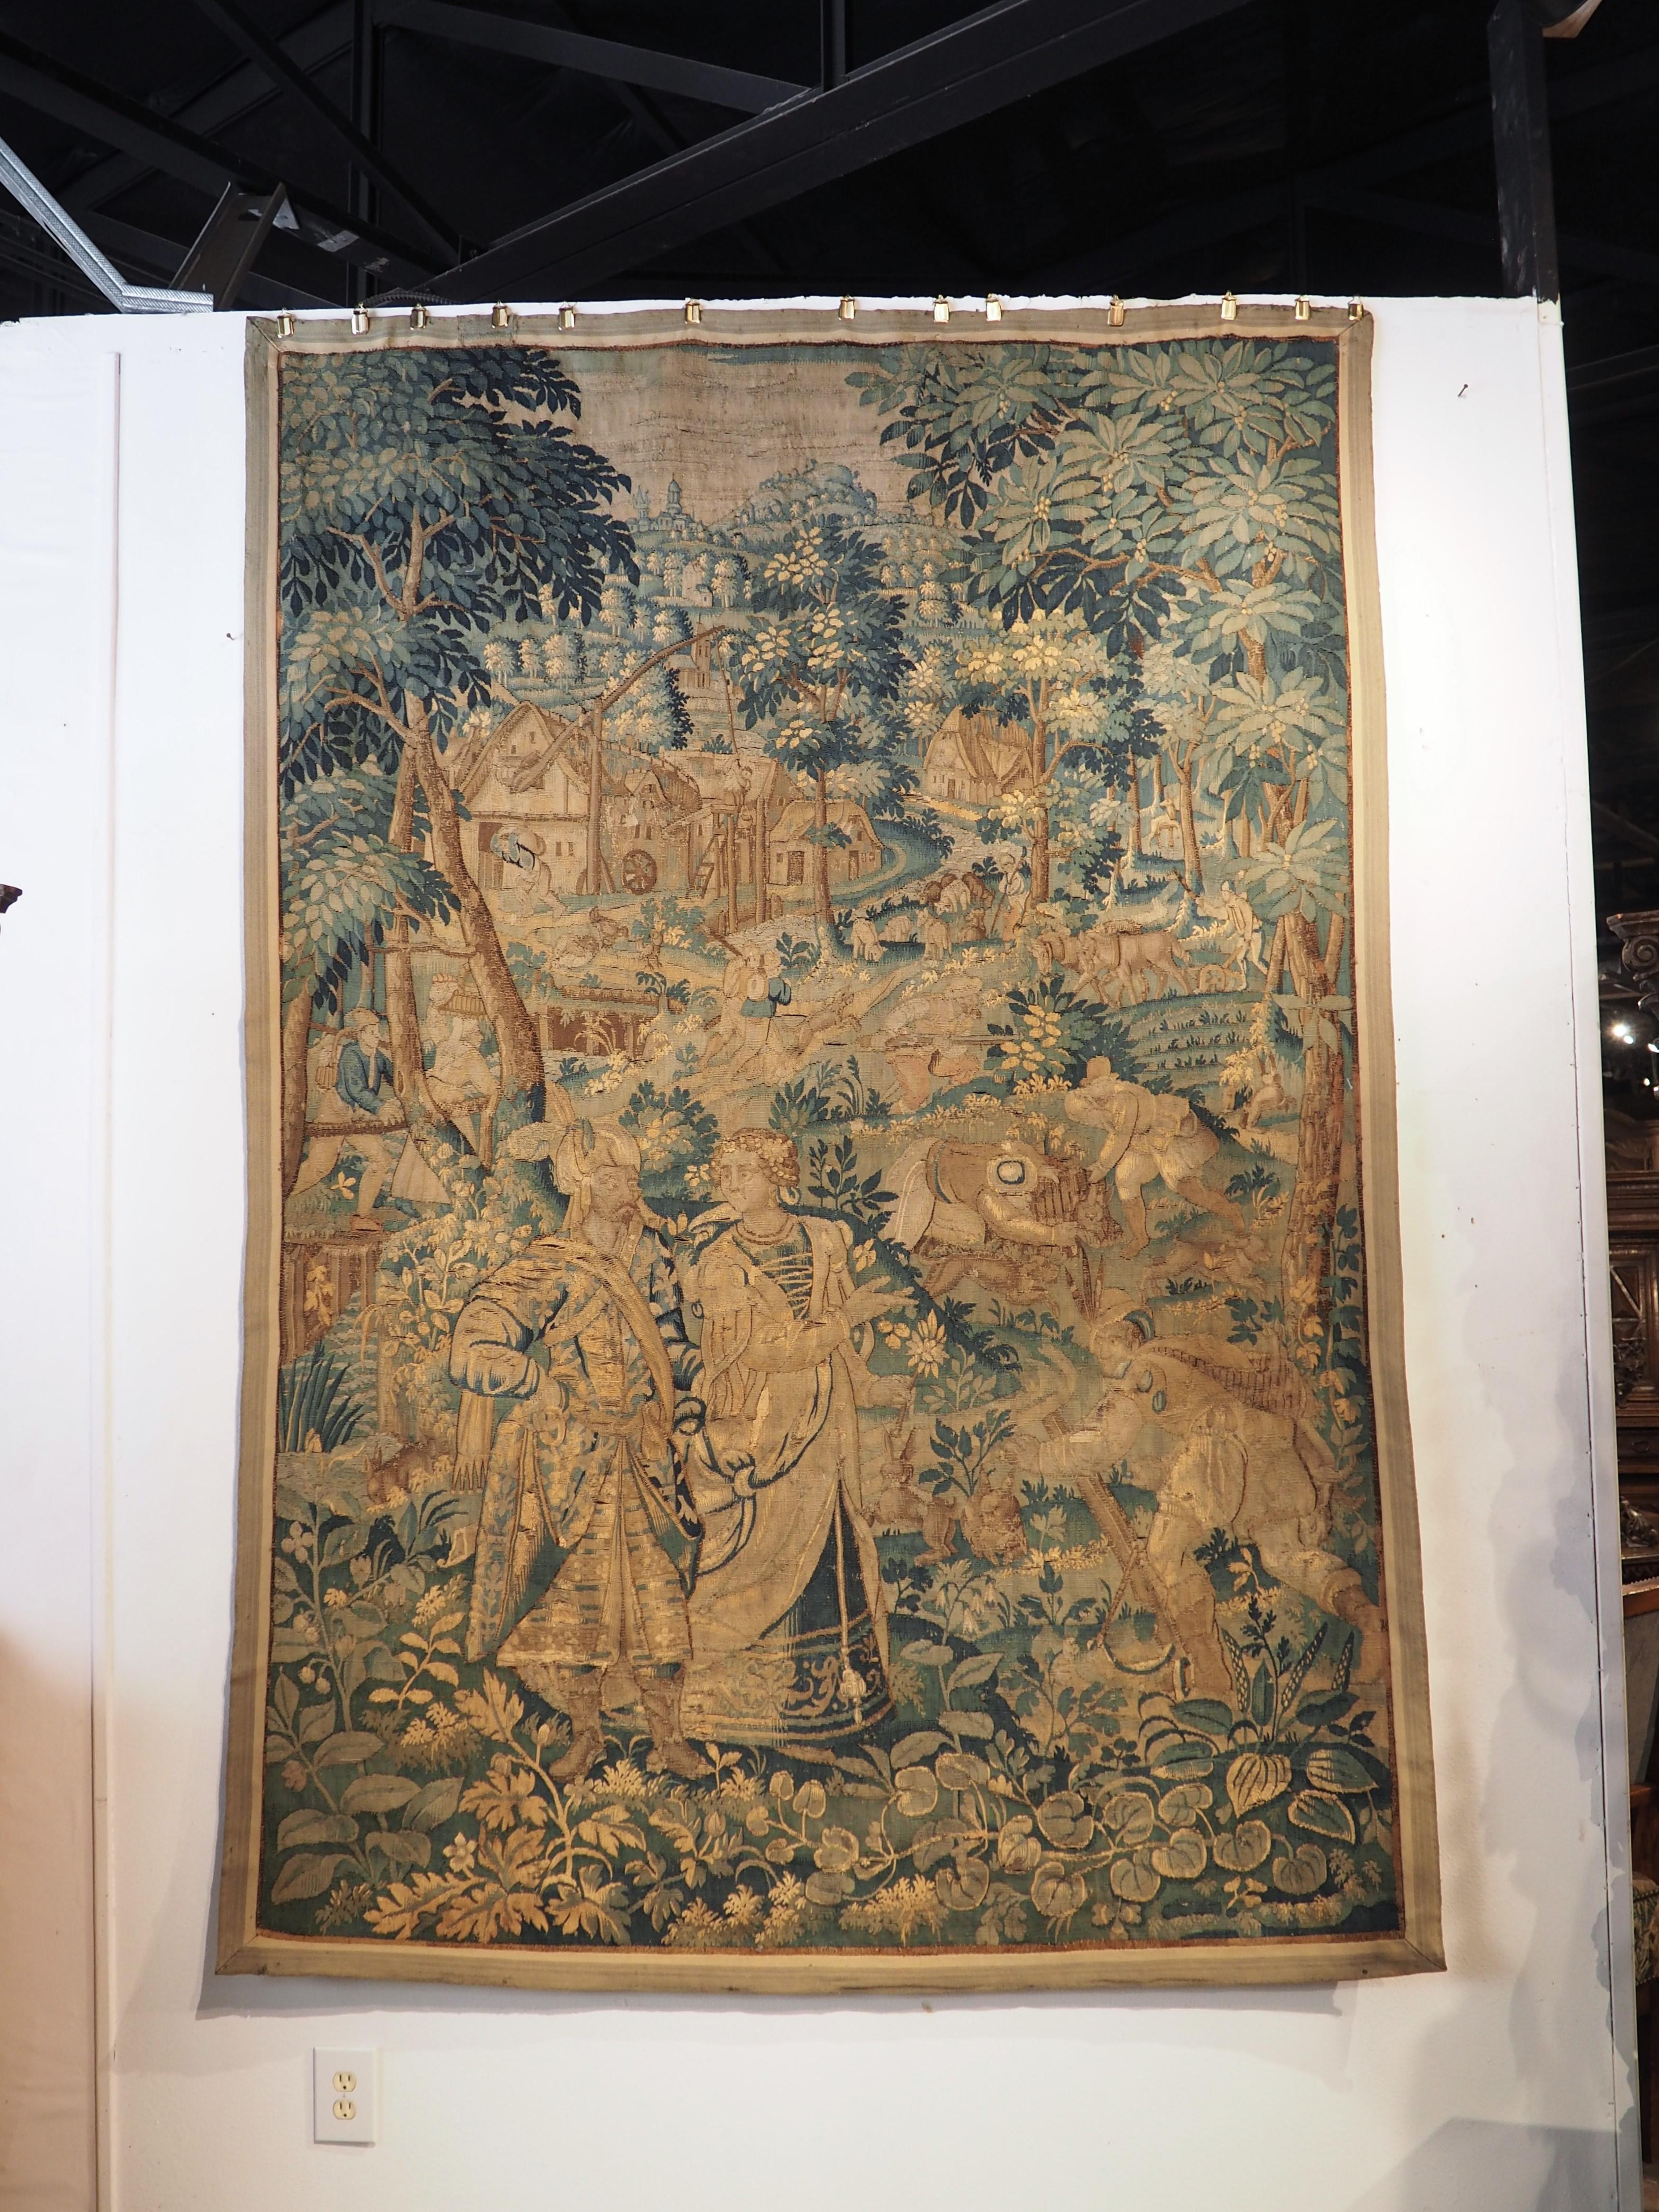 A beautiful verdure landscape with a story to tell, this tapestry was produced in Flanders in the 1500’s. The roughly 500 year old tapestry is comprised of silk and wool fibers that have been dyed green, brown, cream, and gold, with the occasional